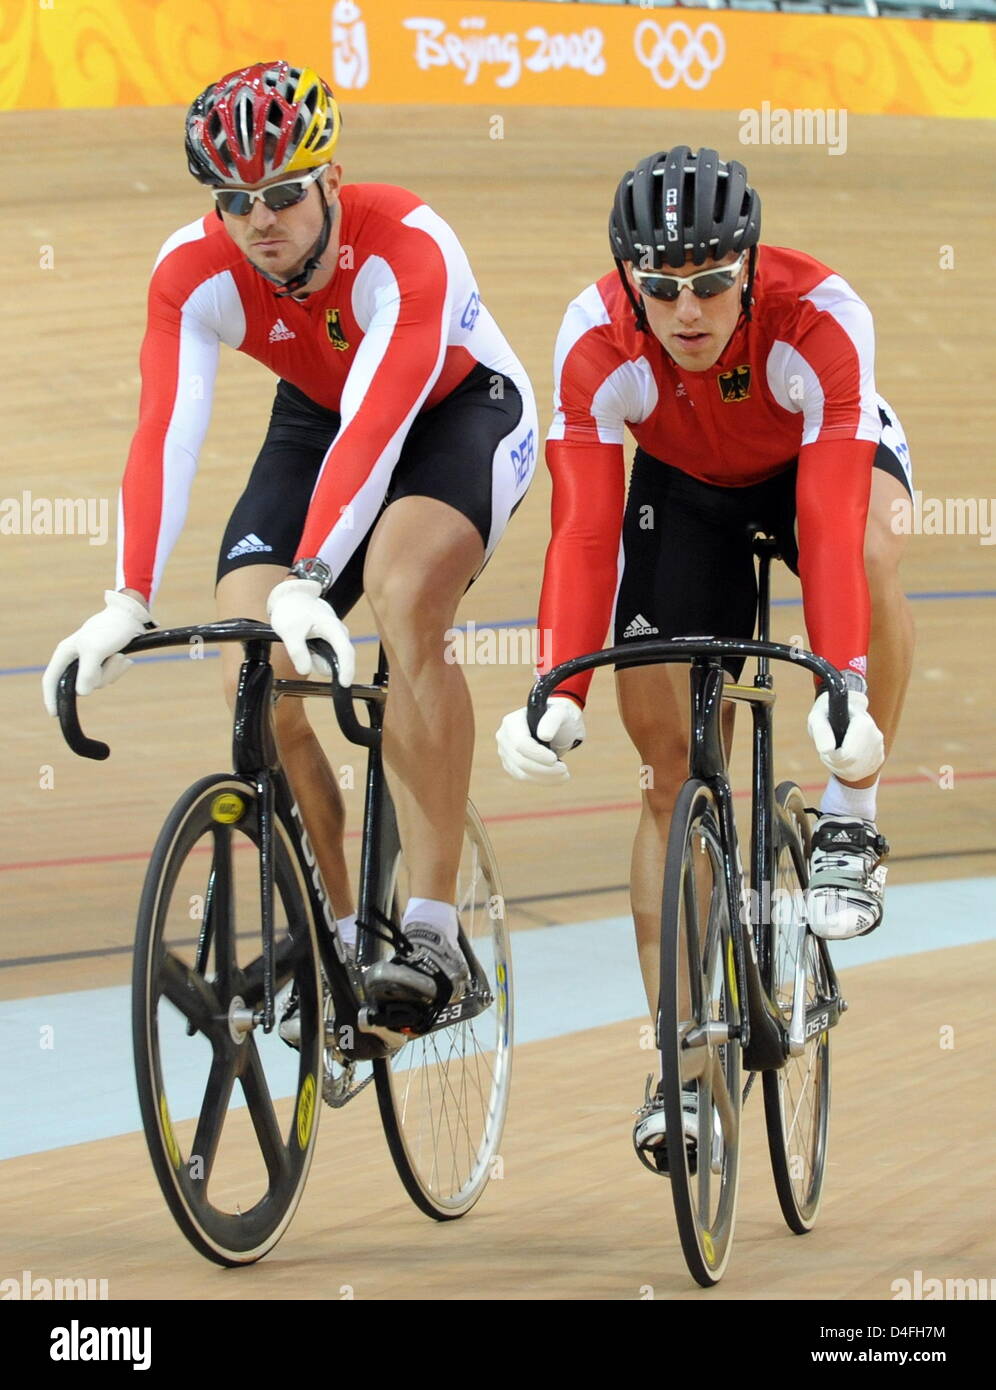 Carsten Bergemann and Stefan Nimke of the German track cycling team trains in the Laoshan Velodrome in preparation of the Beijing 2008 Olympic Games, in Beijing, China, 07 August 2008. Photo: Peer Grimm (c) dpa - Bildfunk Stock Photo